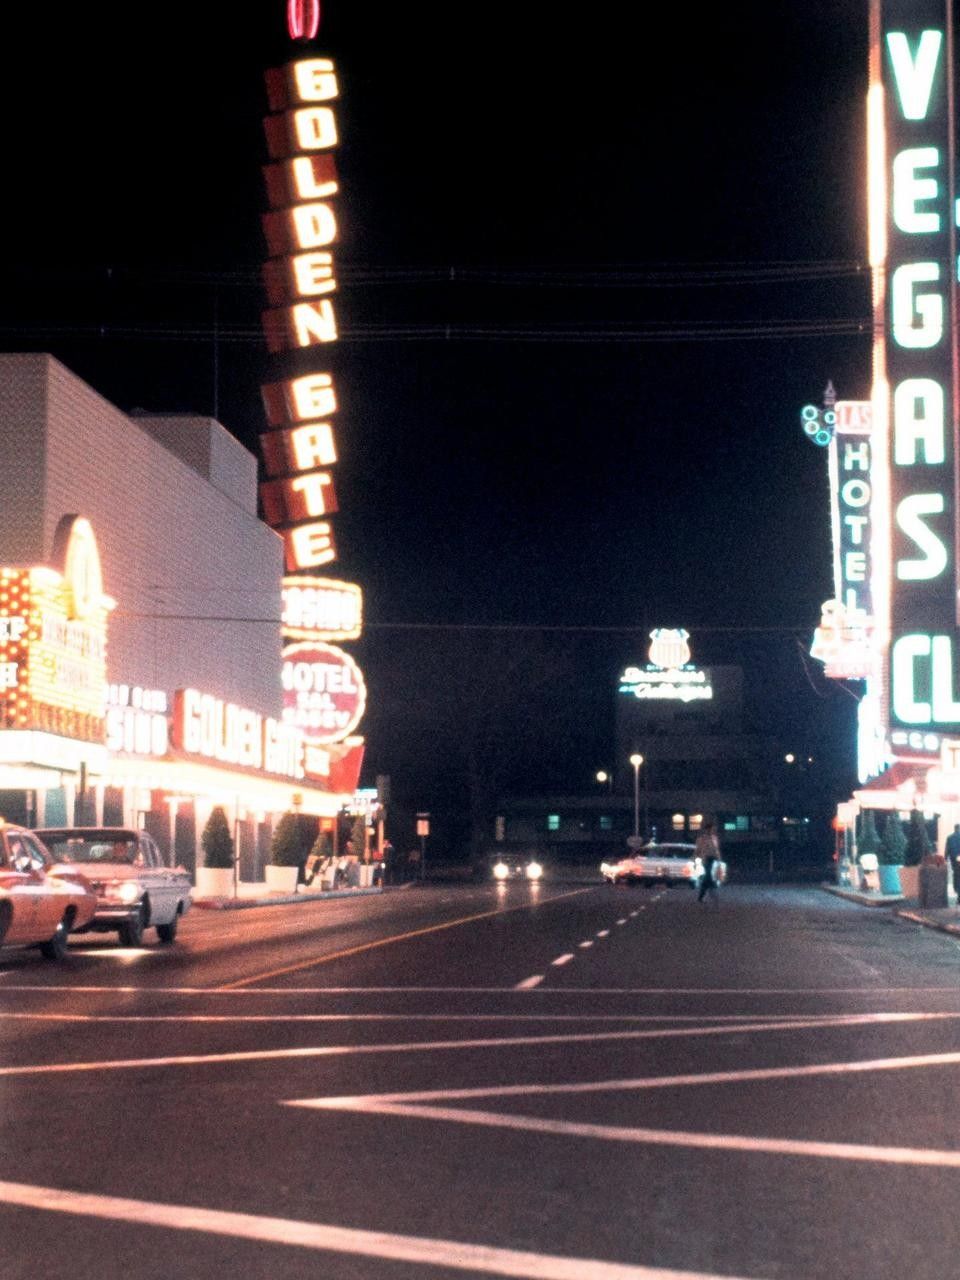 The Golden Gate hotel and casino is seen lit up at night in this undated photo. - Las Vegas